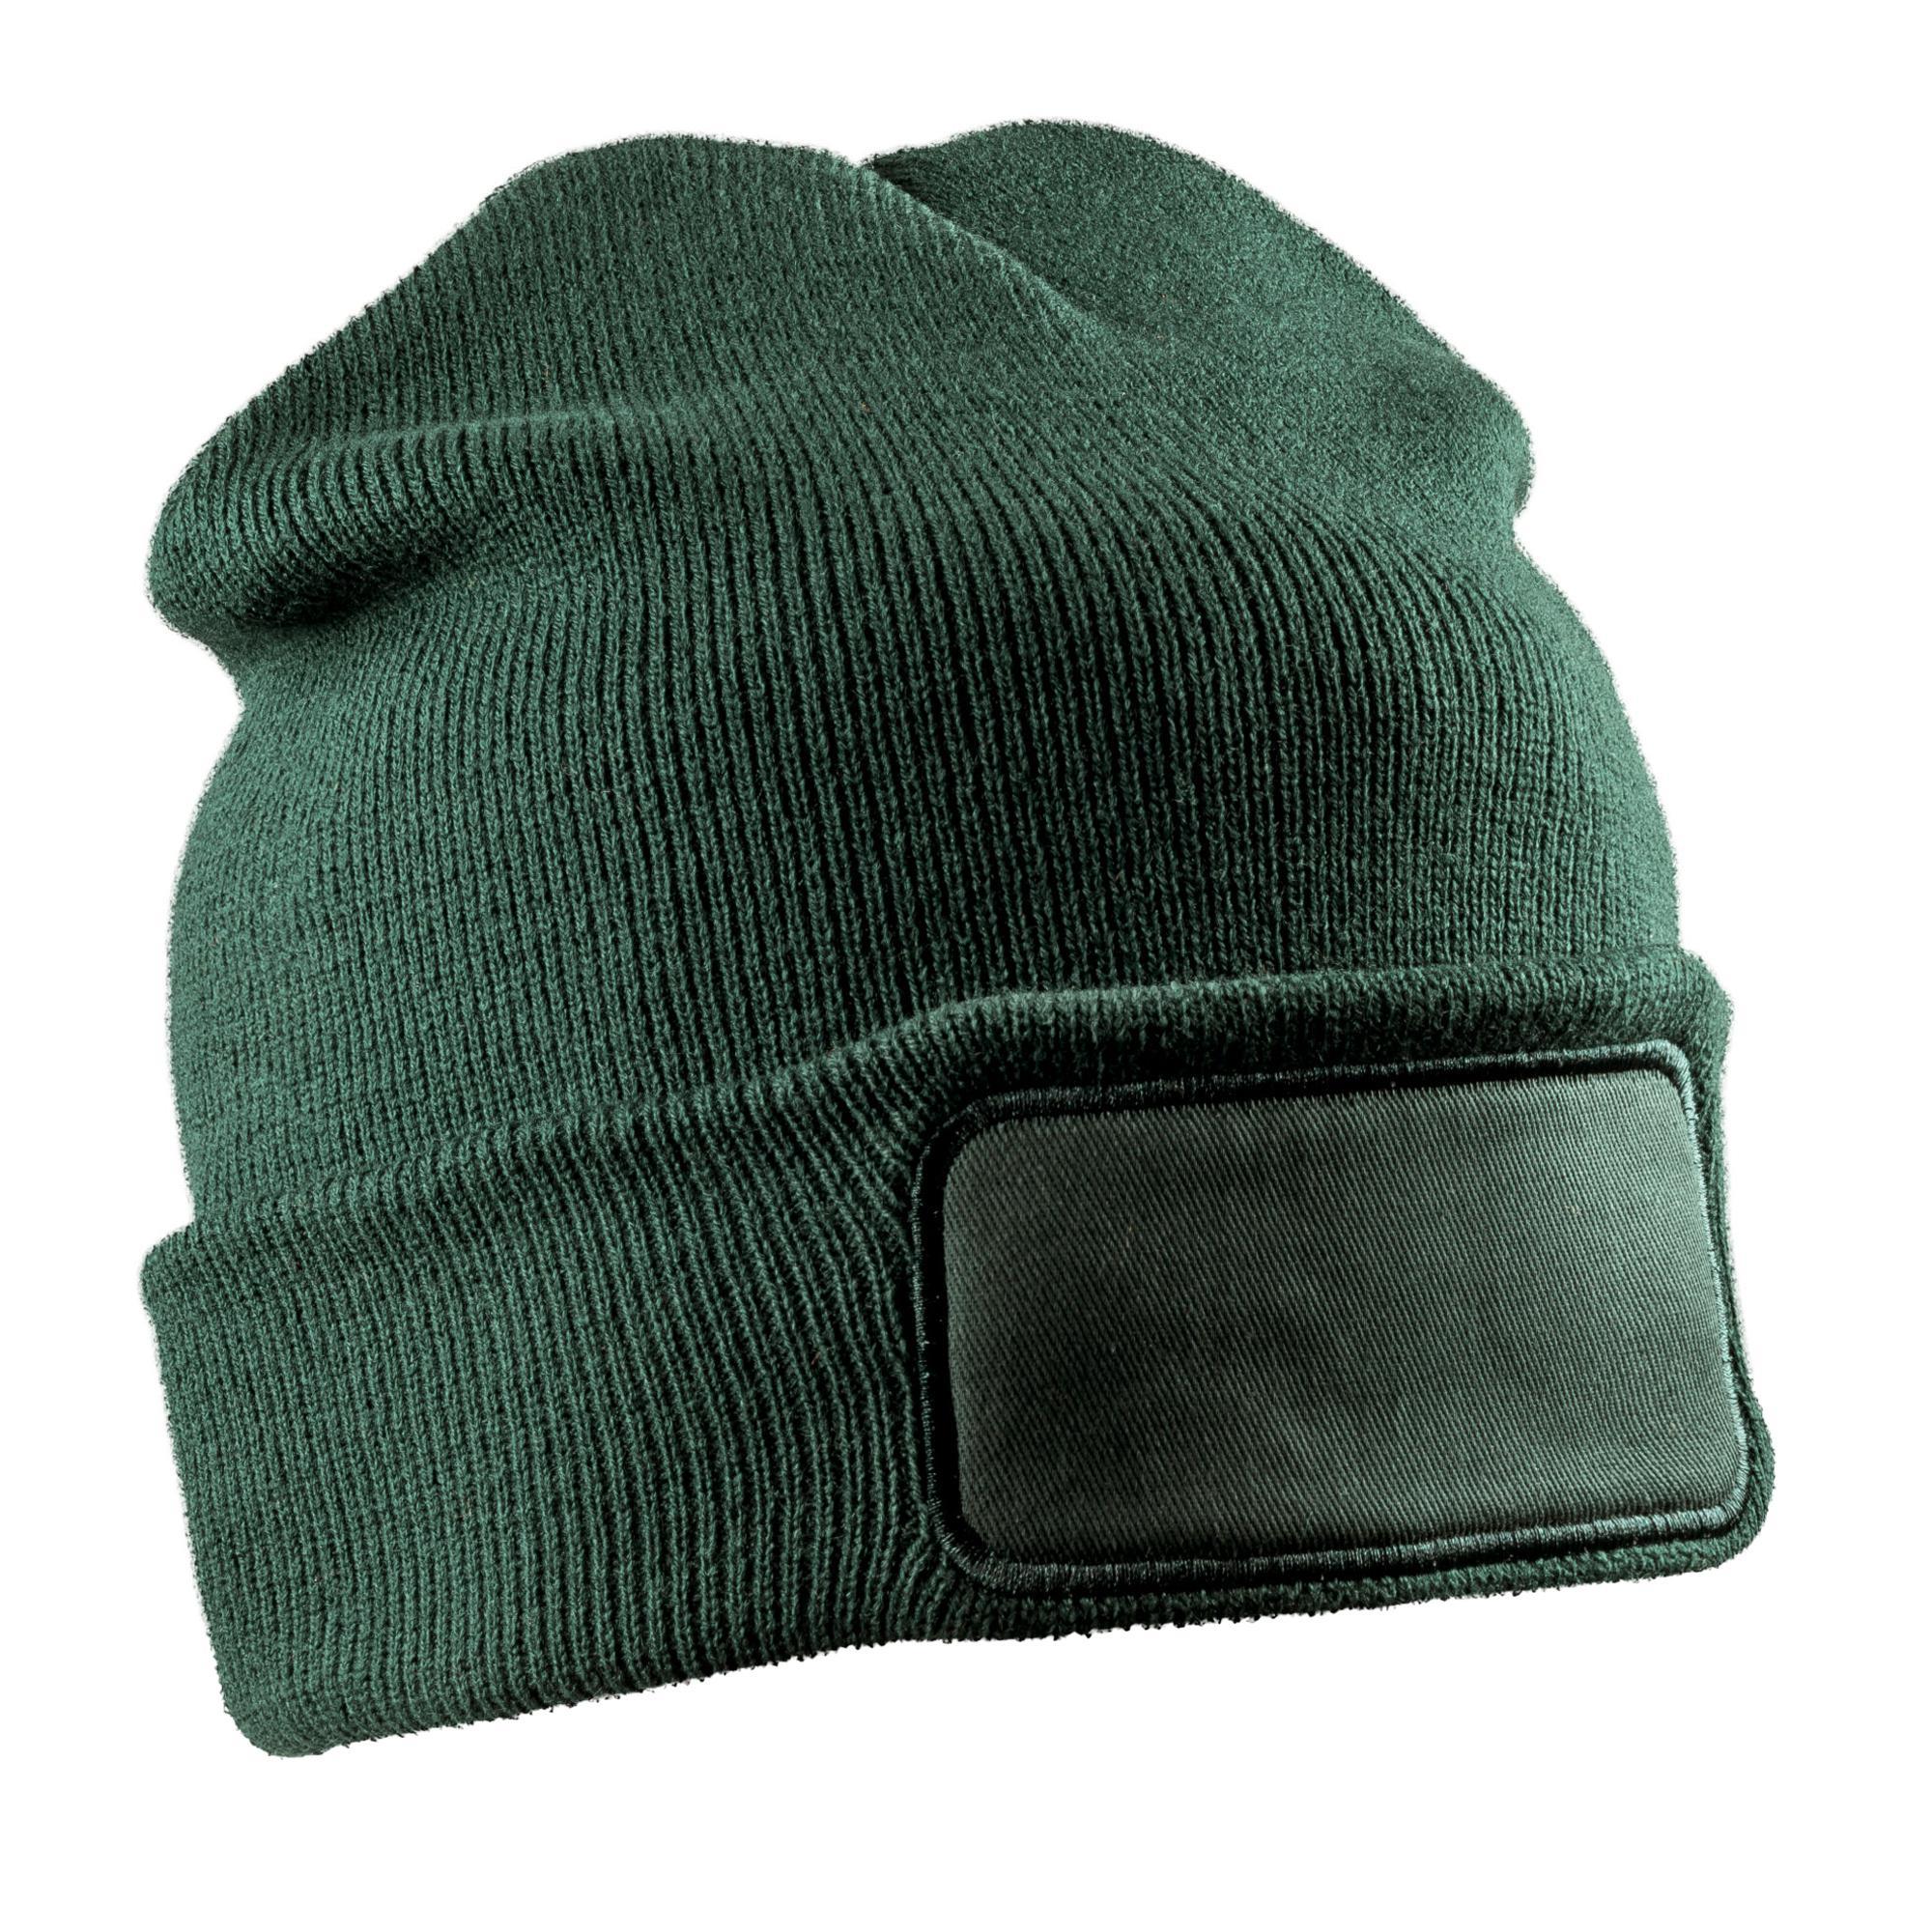 Result Winter Essentials Unisex Adult Double Knit Printer Patch Beanie (Bottle Green) (One Size)